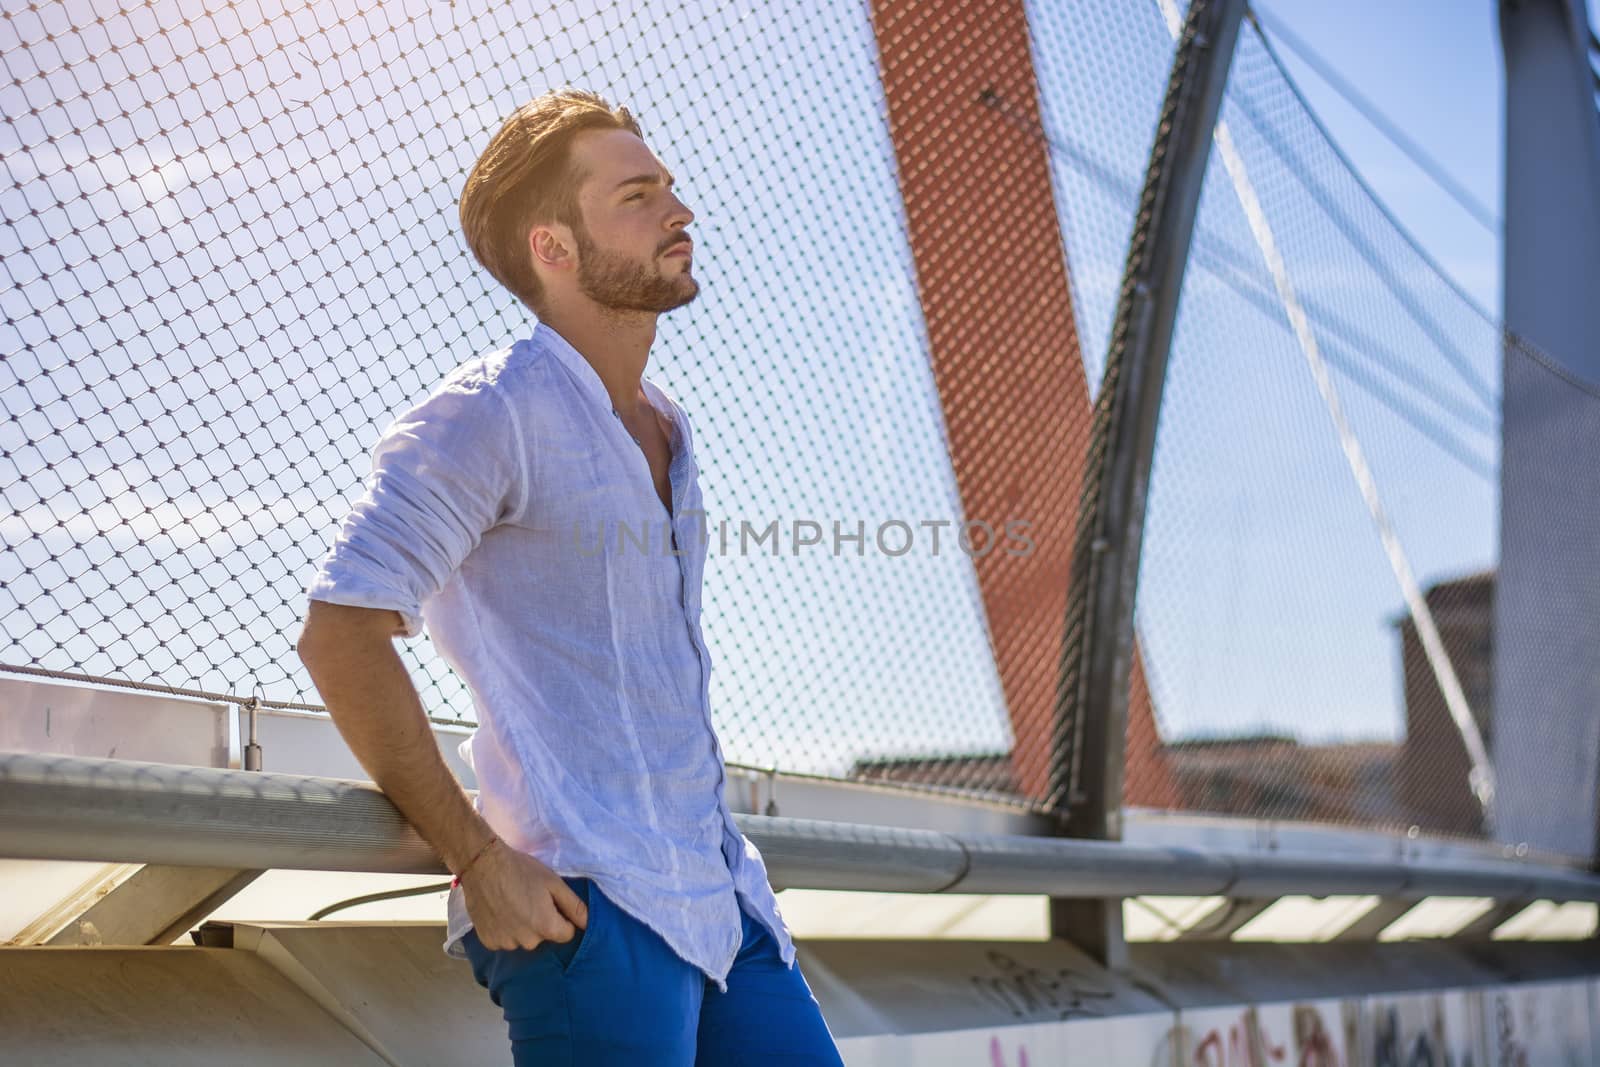 One handsome young man in city setting by artofphoto